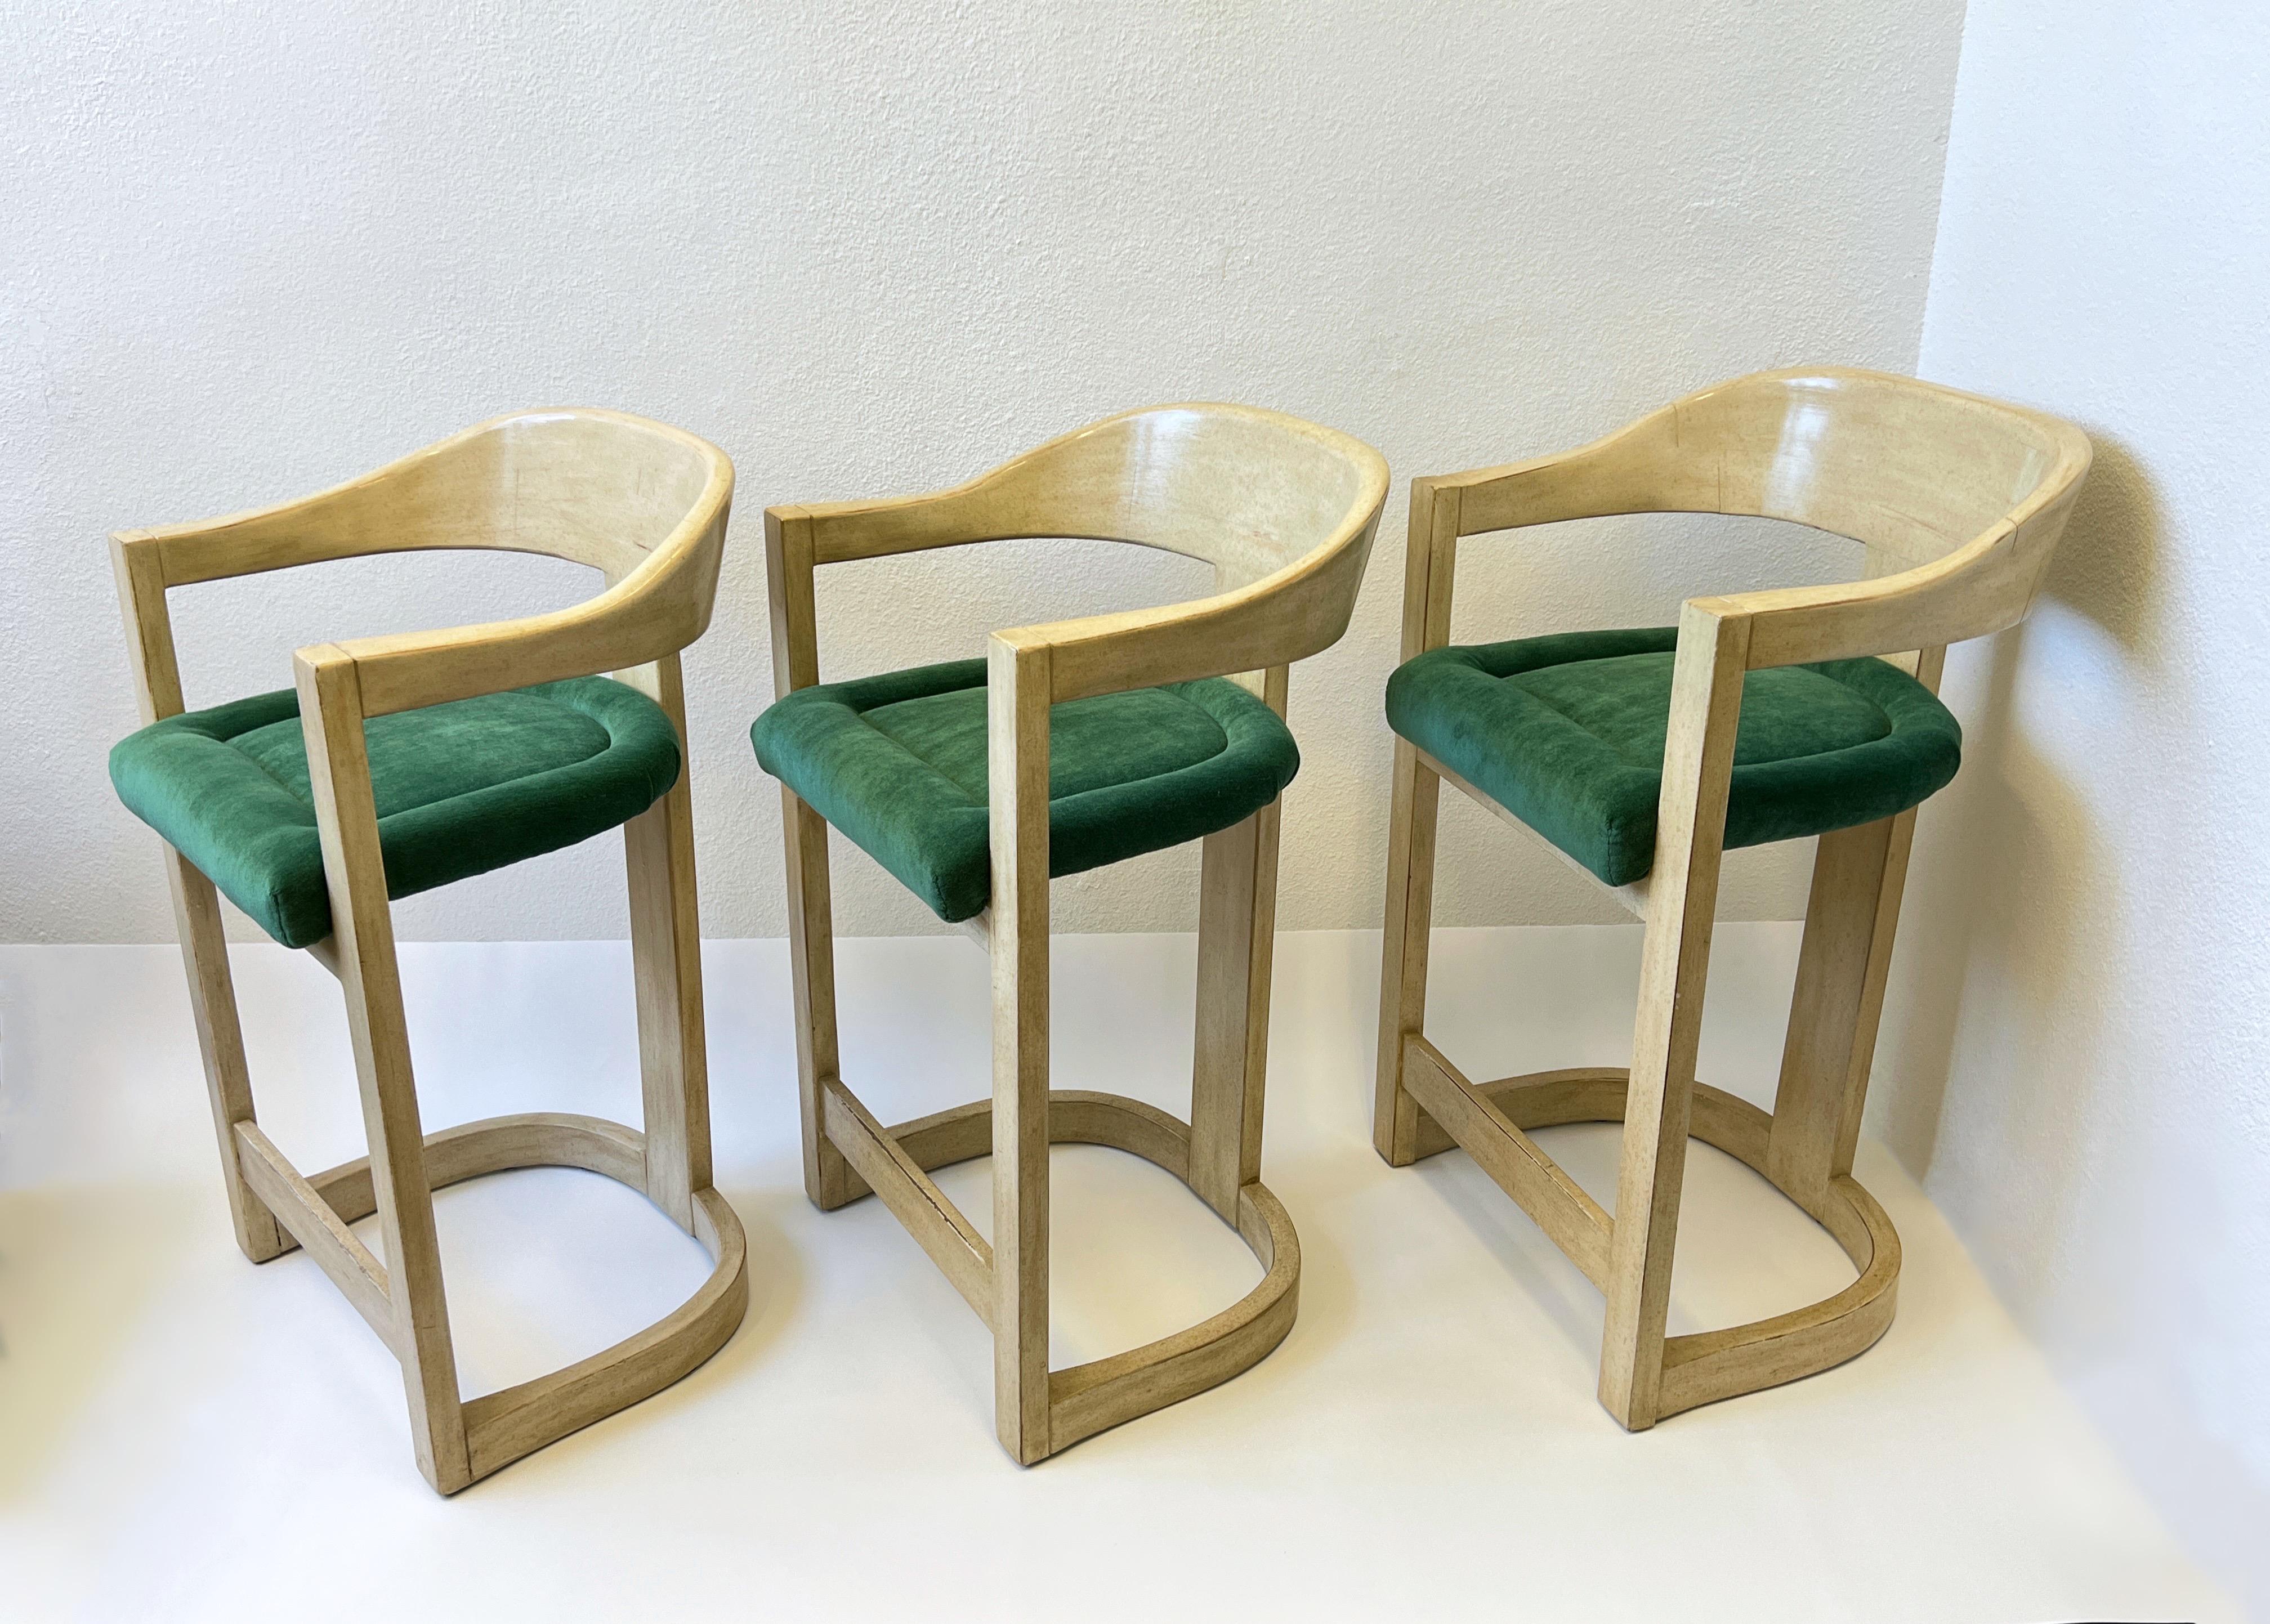 Set of three 1980’s off white lacquered ‘Onassis Barstools’ by Karl Springer for Steve Chase. 
Out of a Steve Chase Design Estate in Rancho Mirage CA. 
Constructed of carved wood with a off white speckled lacquered (see detail photos) and emerald